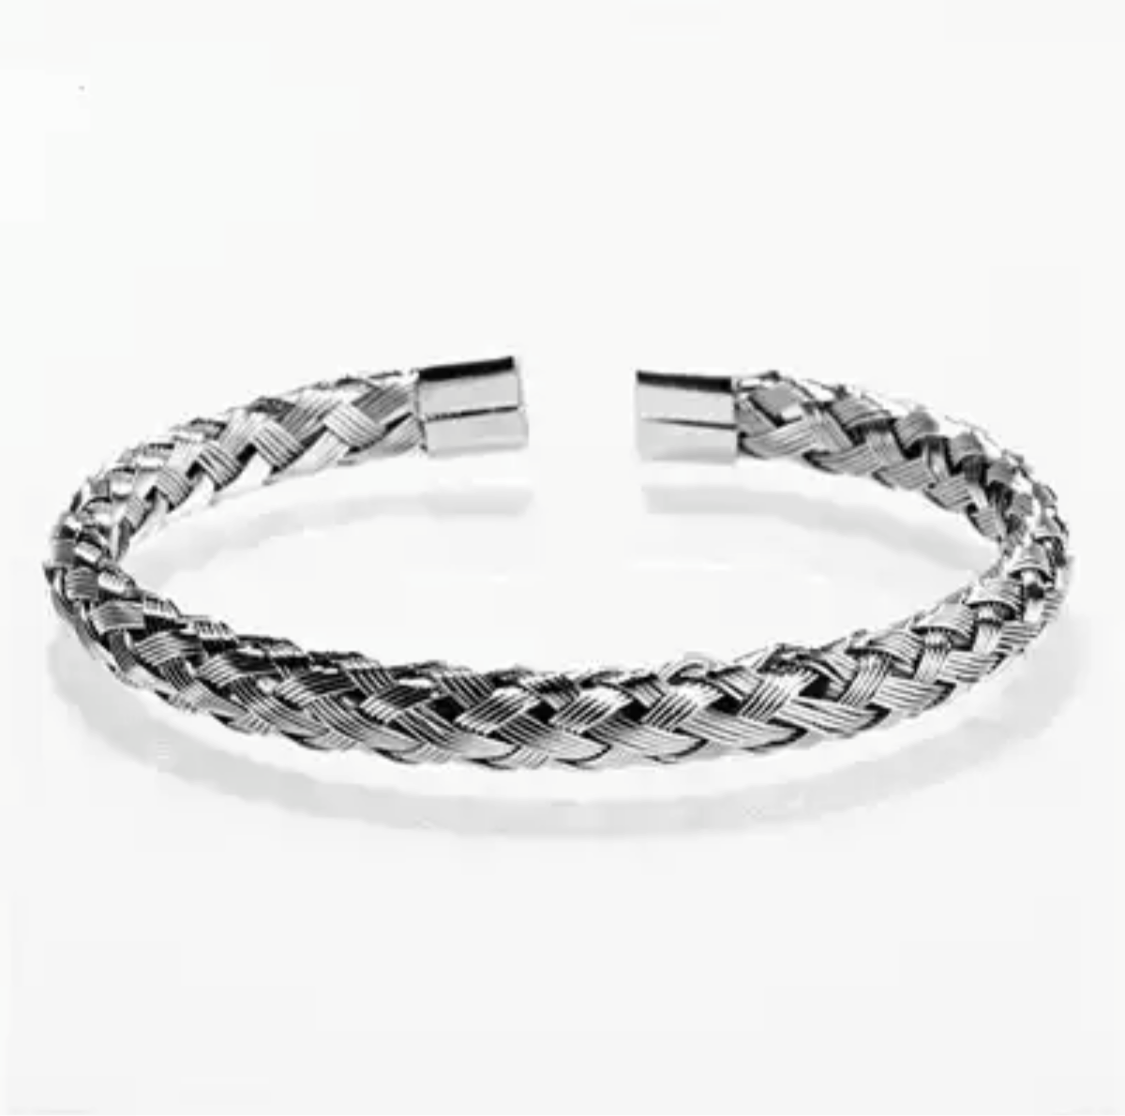 Argent Craft Titan Crafted Bangle (silver)